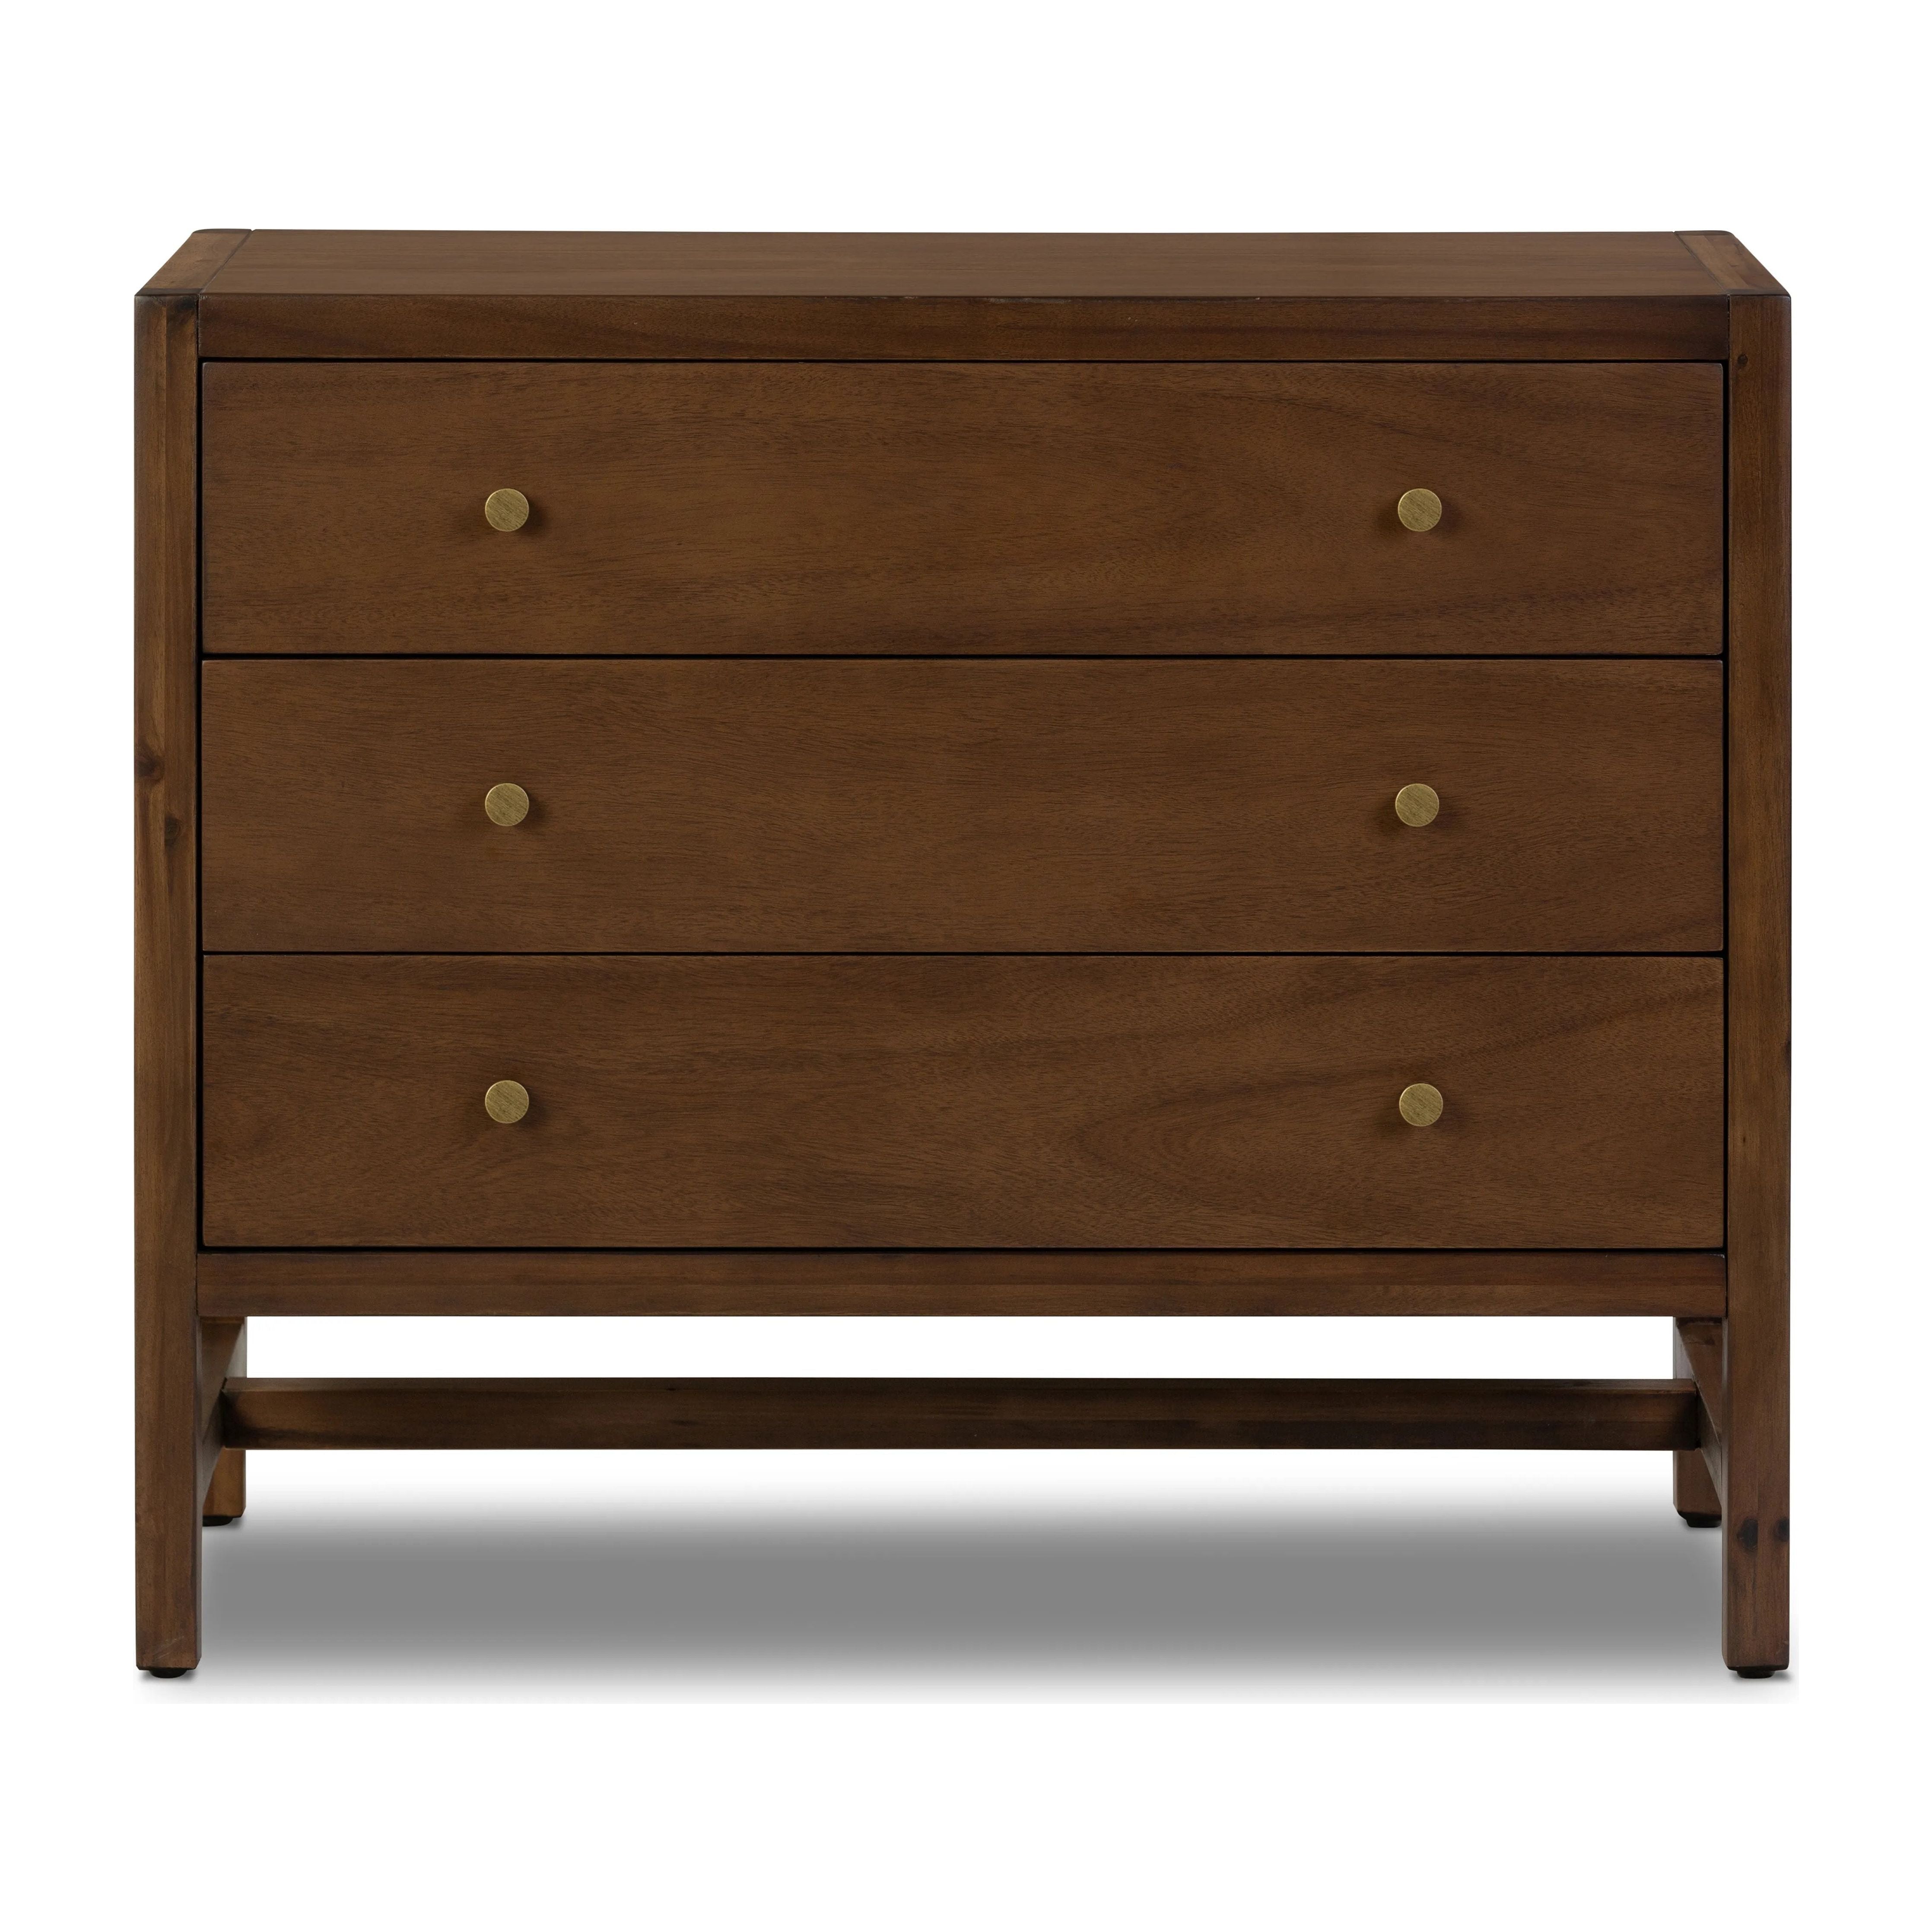 A simple, heavy wood Parsons-style nightstand with three drawers for ample storage. Finished in solid ash with brass hardware Amethyst Home provides interior design, new home construction design consulting, vintage area rugs, and lighting in the Omaha metro area.